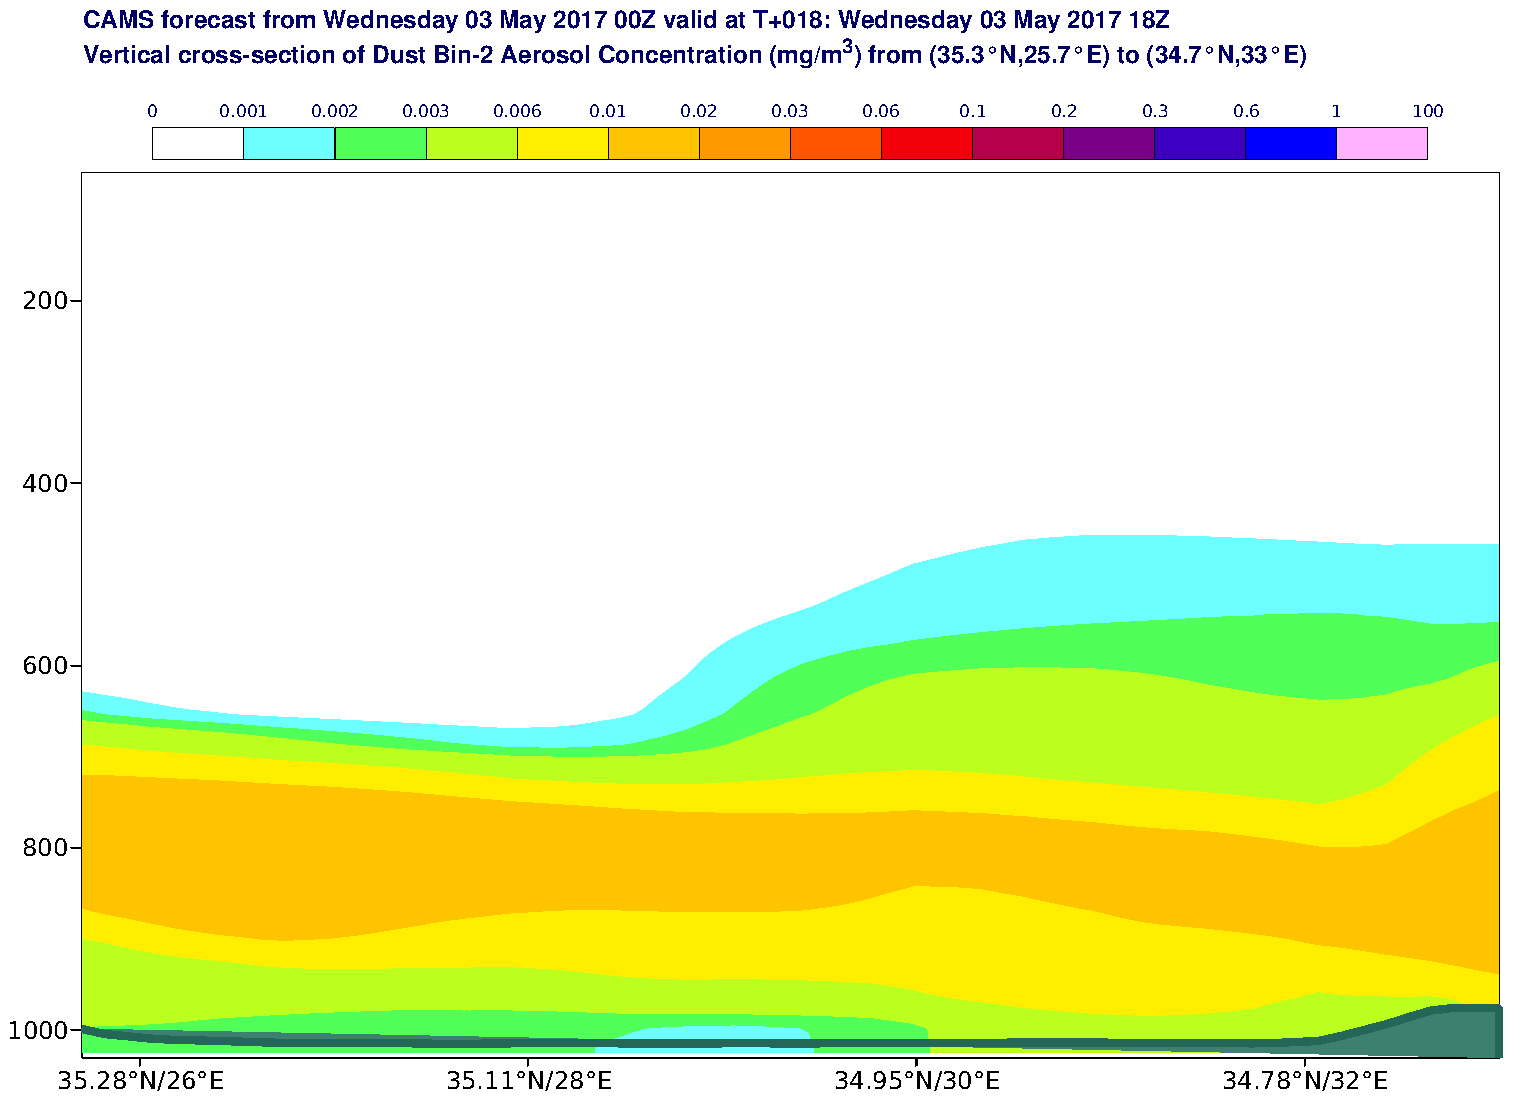 Vertical cross-section of Dust Bin-2 Aerosol Concentration (mg/m3) valid at T18 - 2017-05-03 18:00